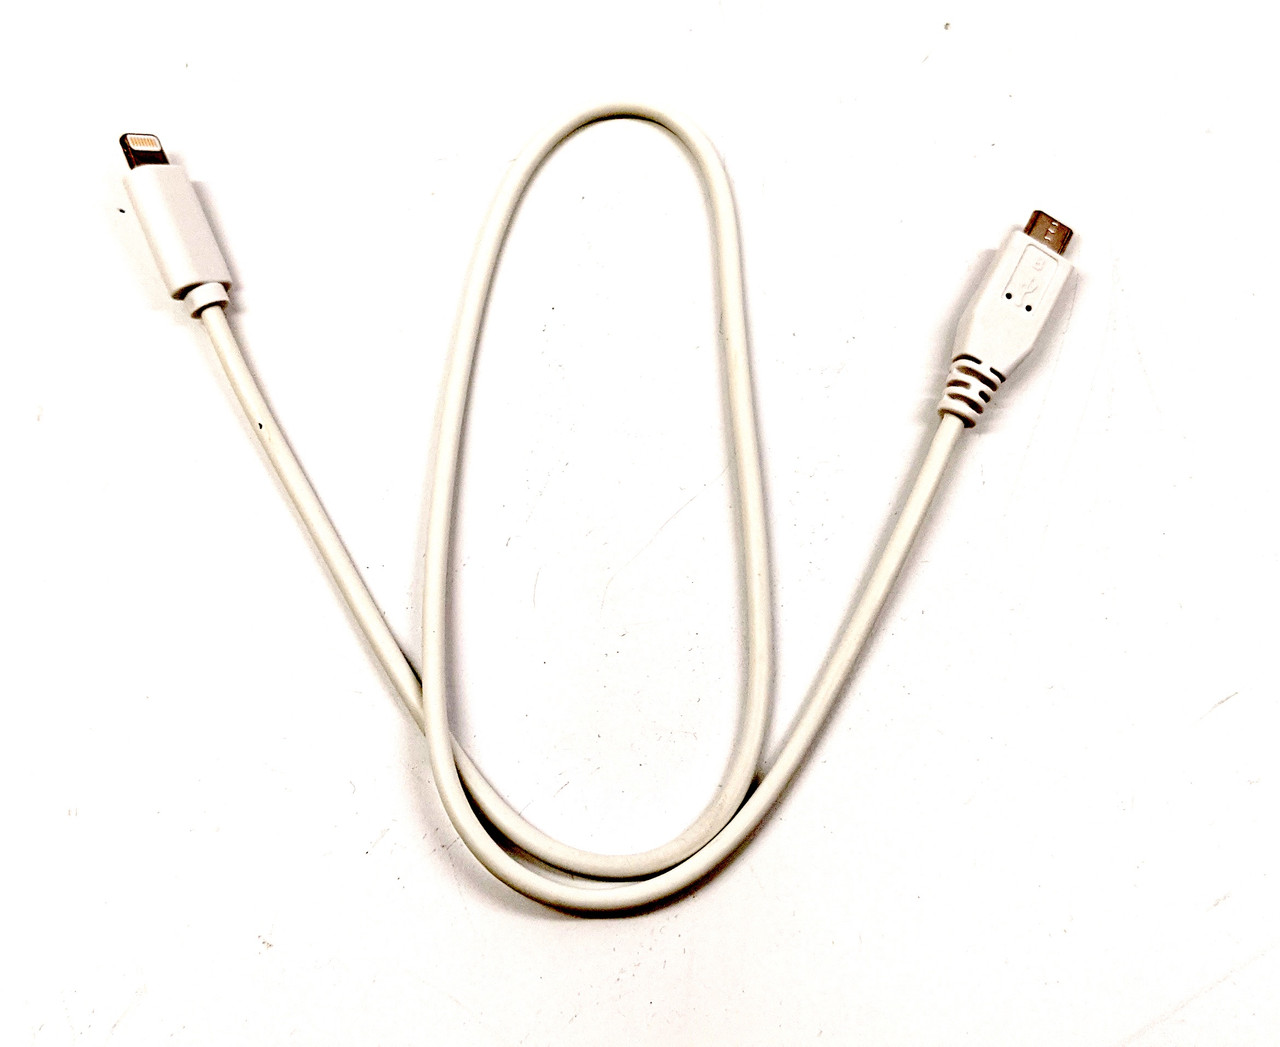 usb to mixer cable